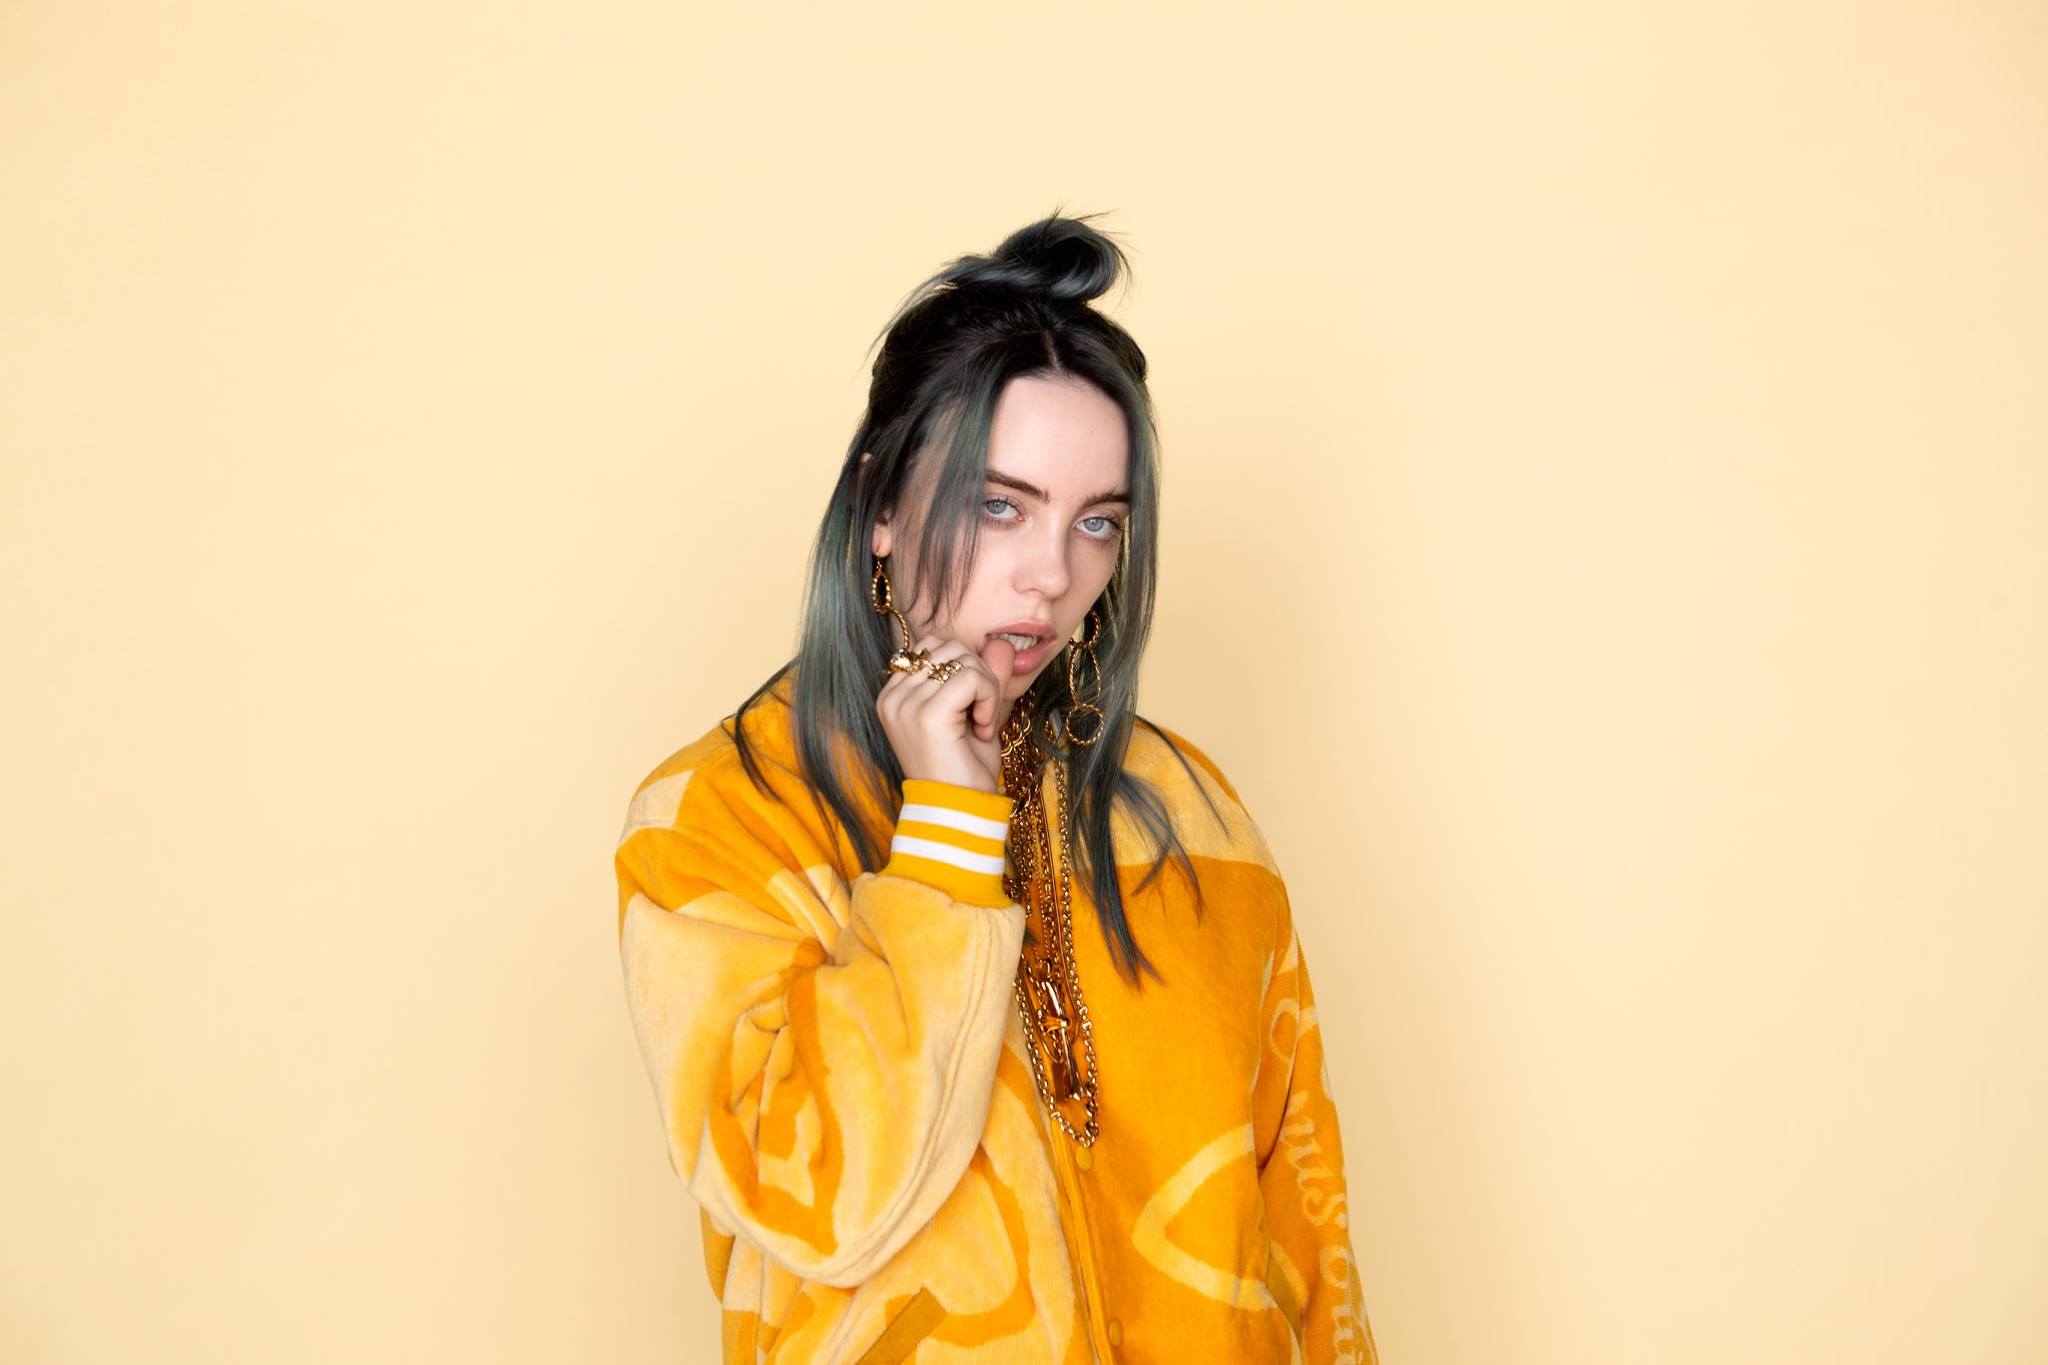 Billie Eilish stares at the camera against a yellow background.